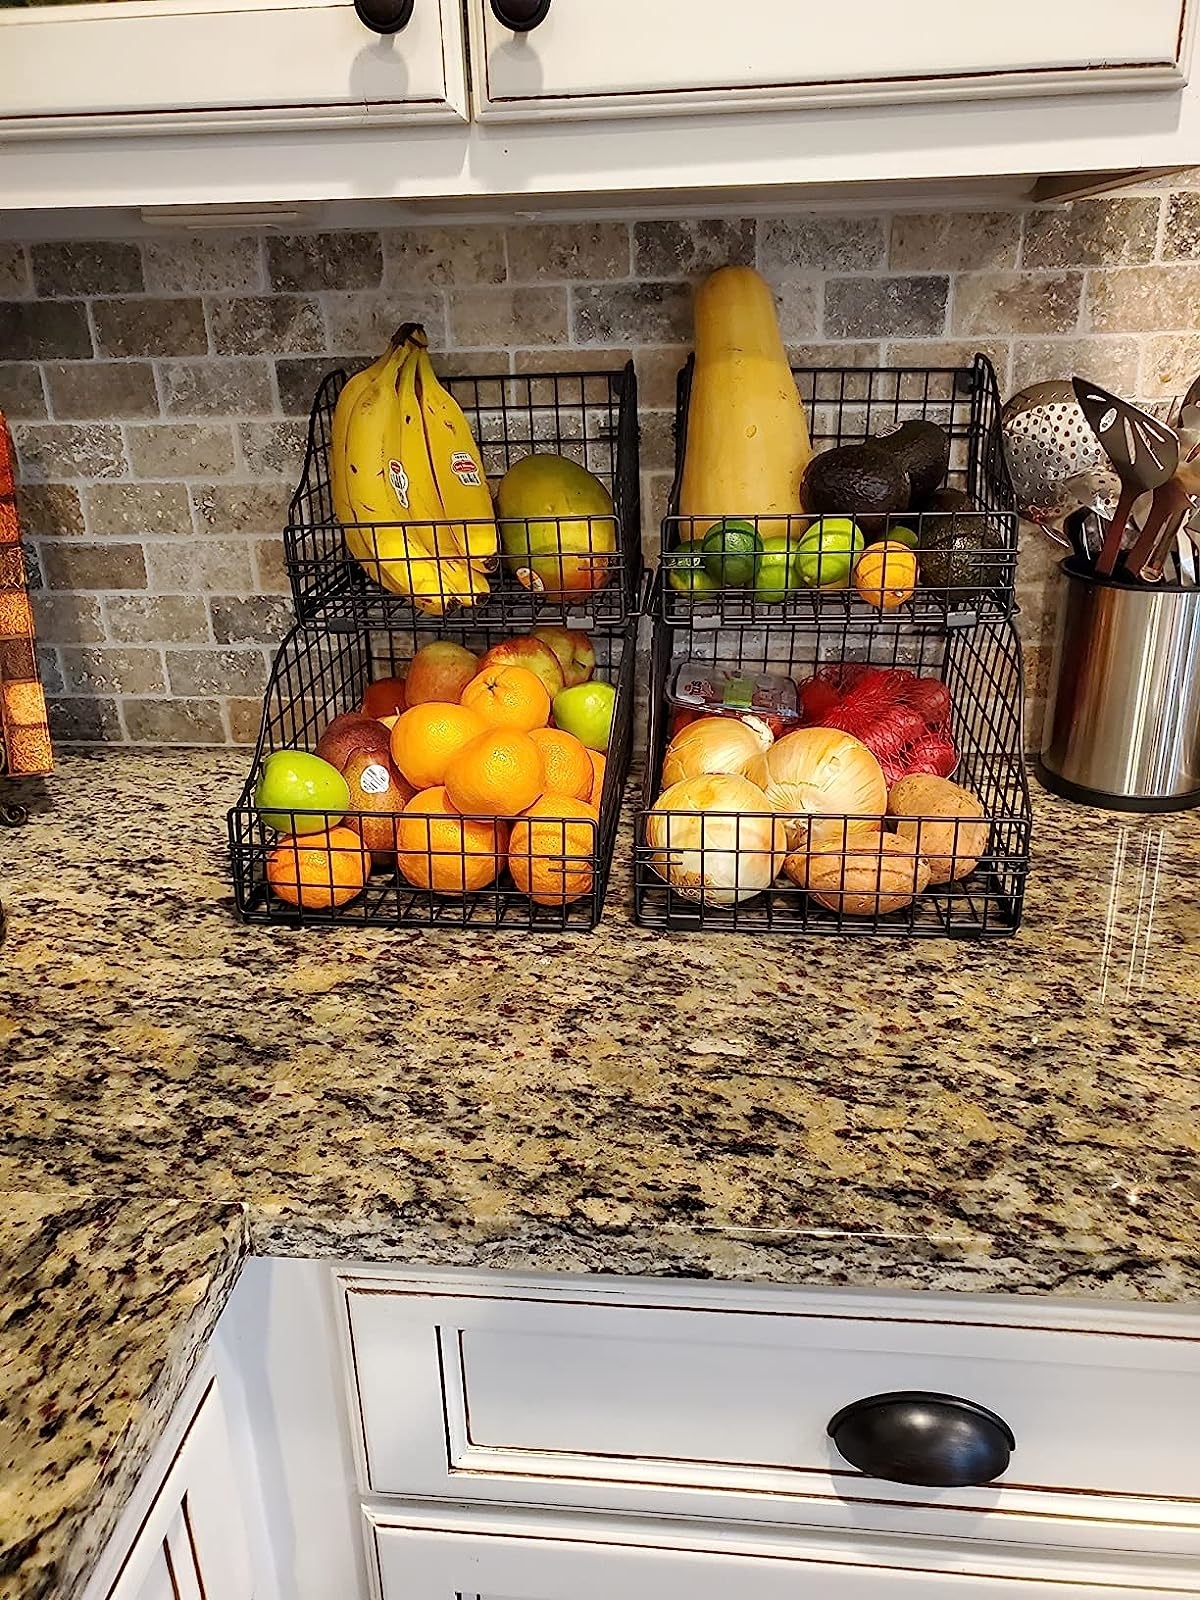 Reviewer image of the wire organizers on their counter holding produce